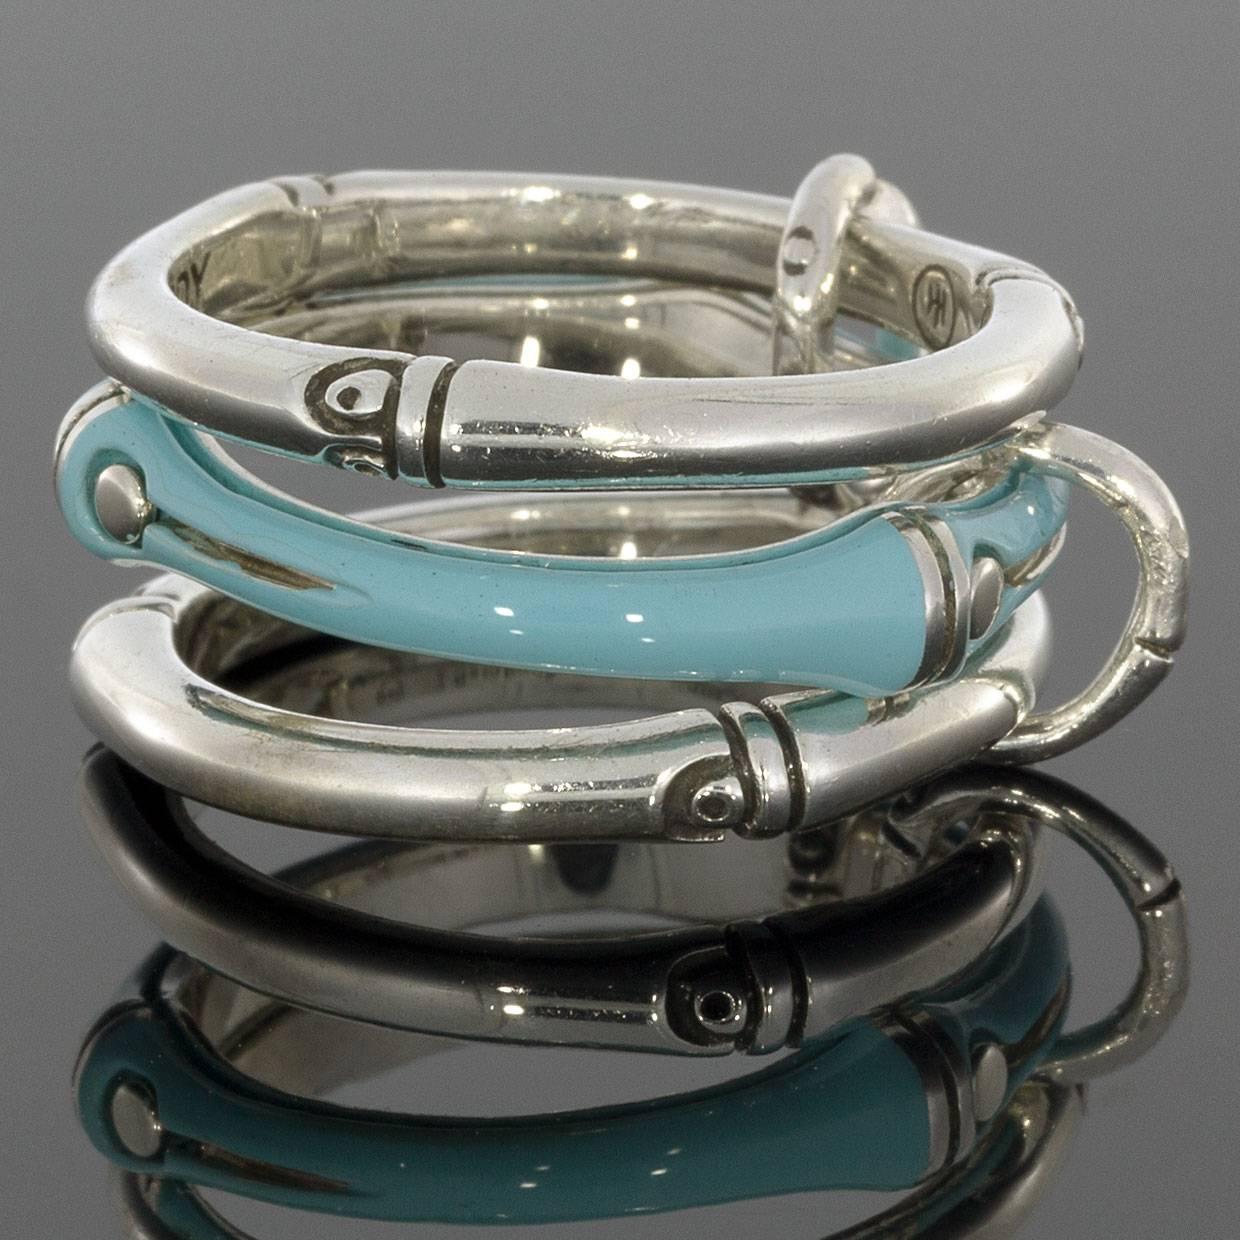 
Each piece of John Hardy jewelry has been crafted in Bali since 1975. John Hardy is dedicated to creating timeless one-of-a-kind pieces that are brilliantly alive.

This stacked sterling silver and enamel ring set is from John Hardy's Bamboo